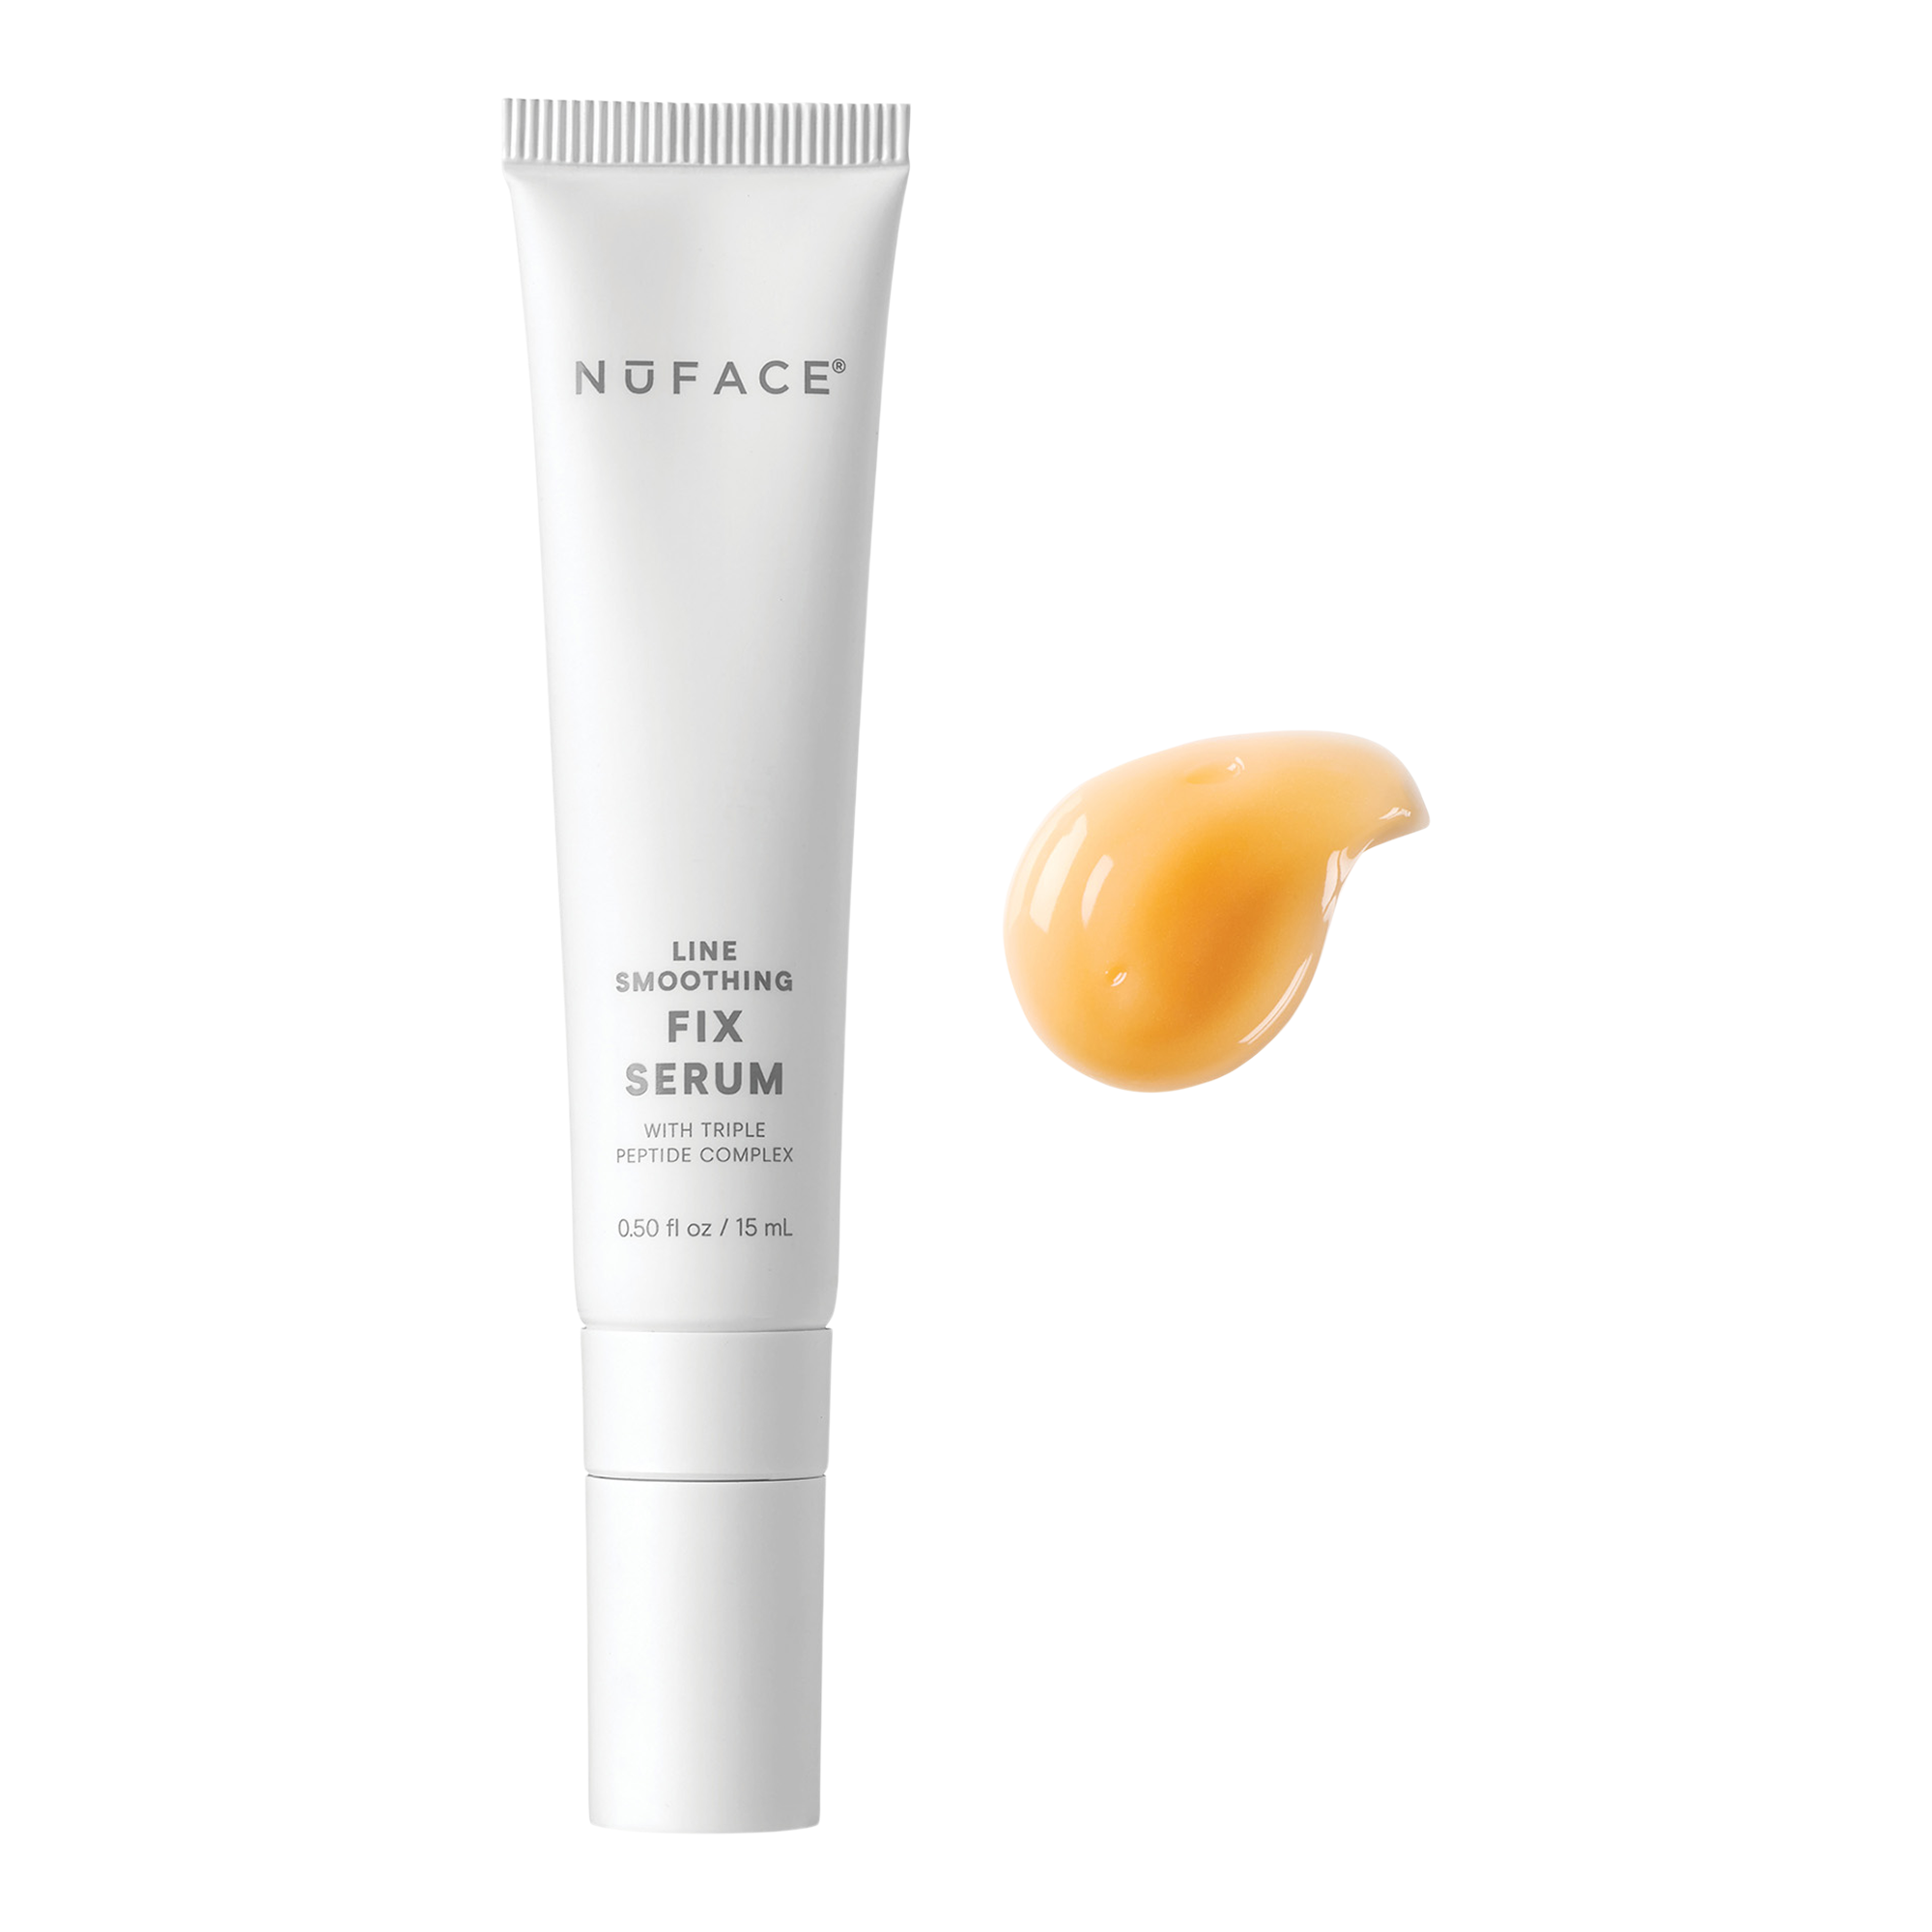 NuFace Fix Line Smoothing Device / KIT